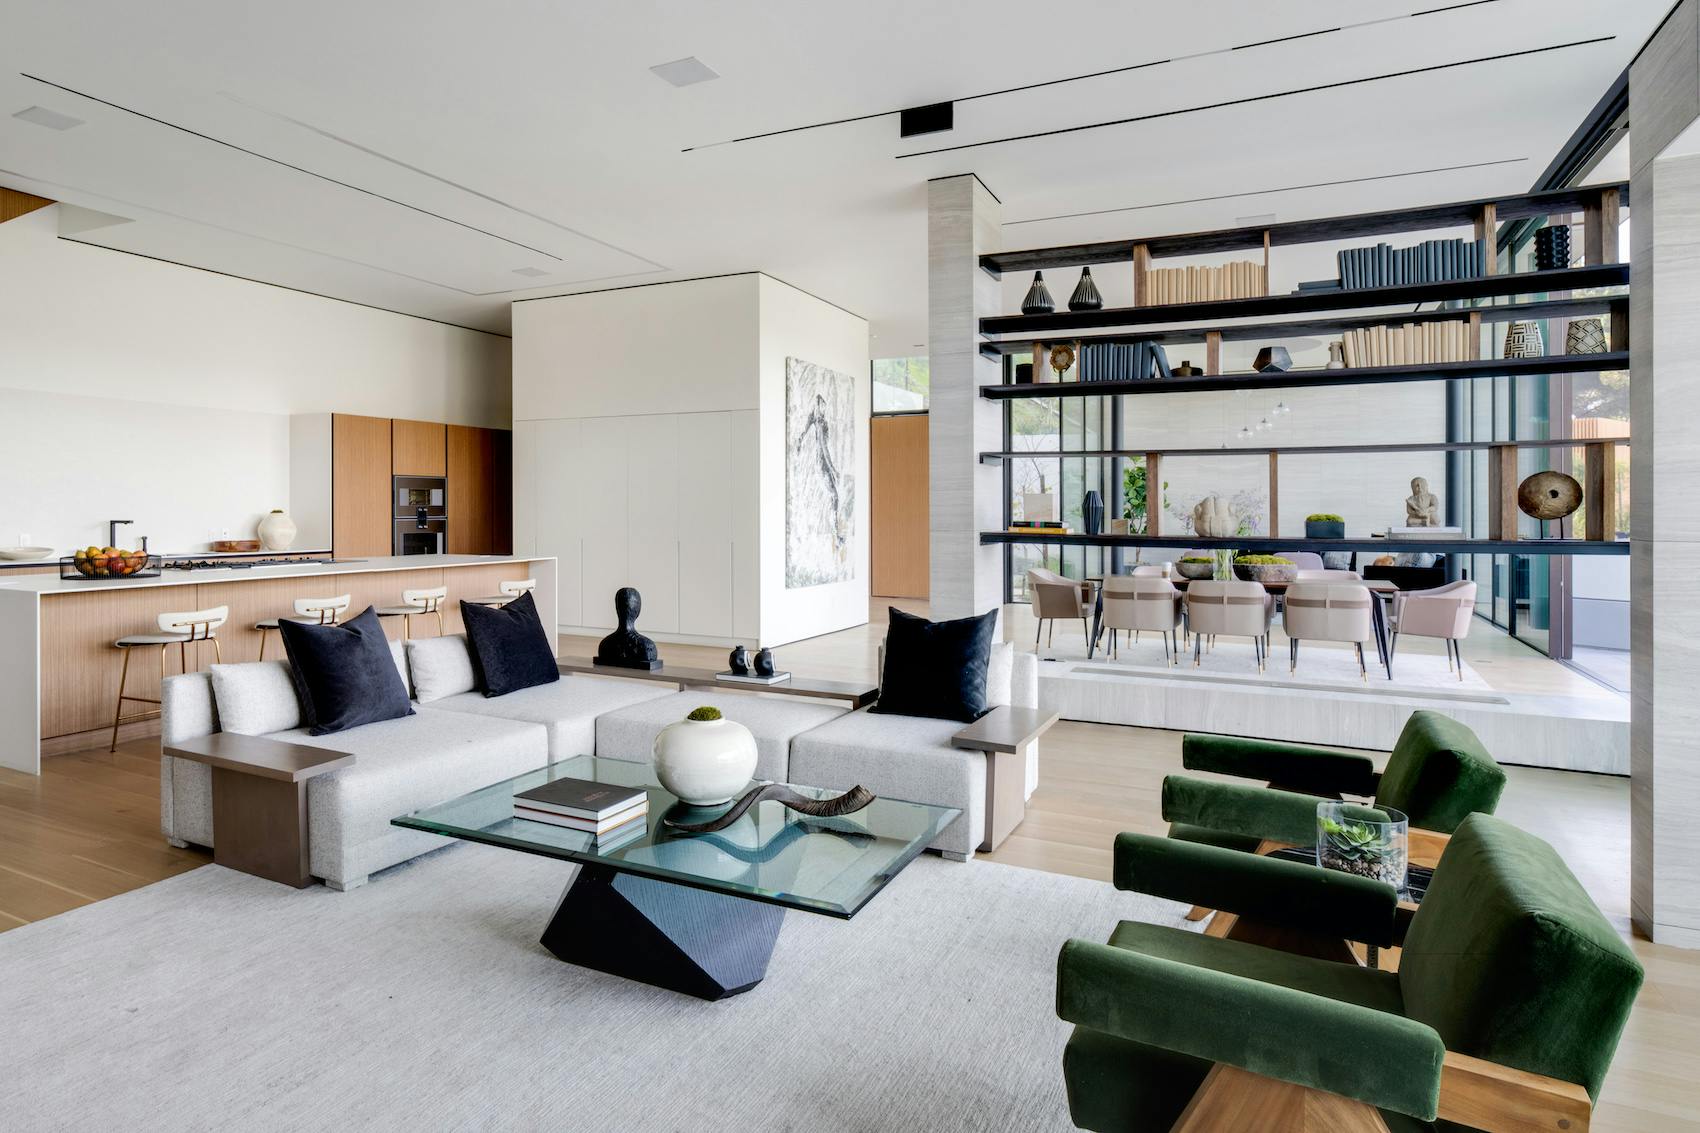 Meridith-Baer-Home-Home-Staging-Southern-California-Hazen-Drive-Luxury-Homes-Modern-and-Contemporary-Living-Room